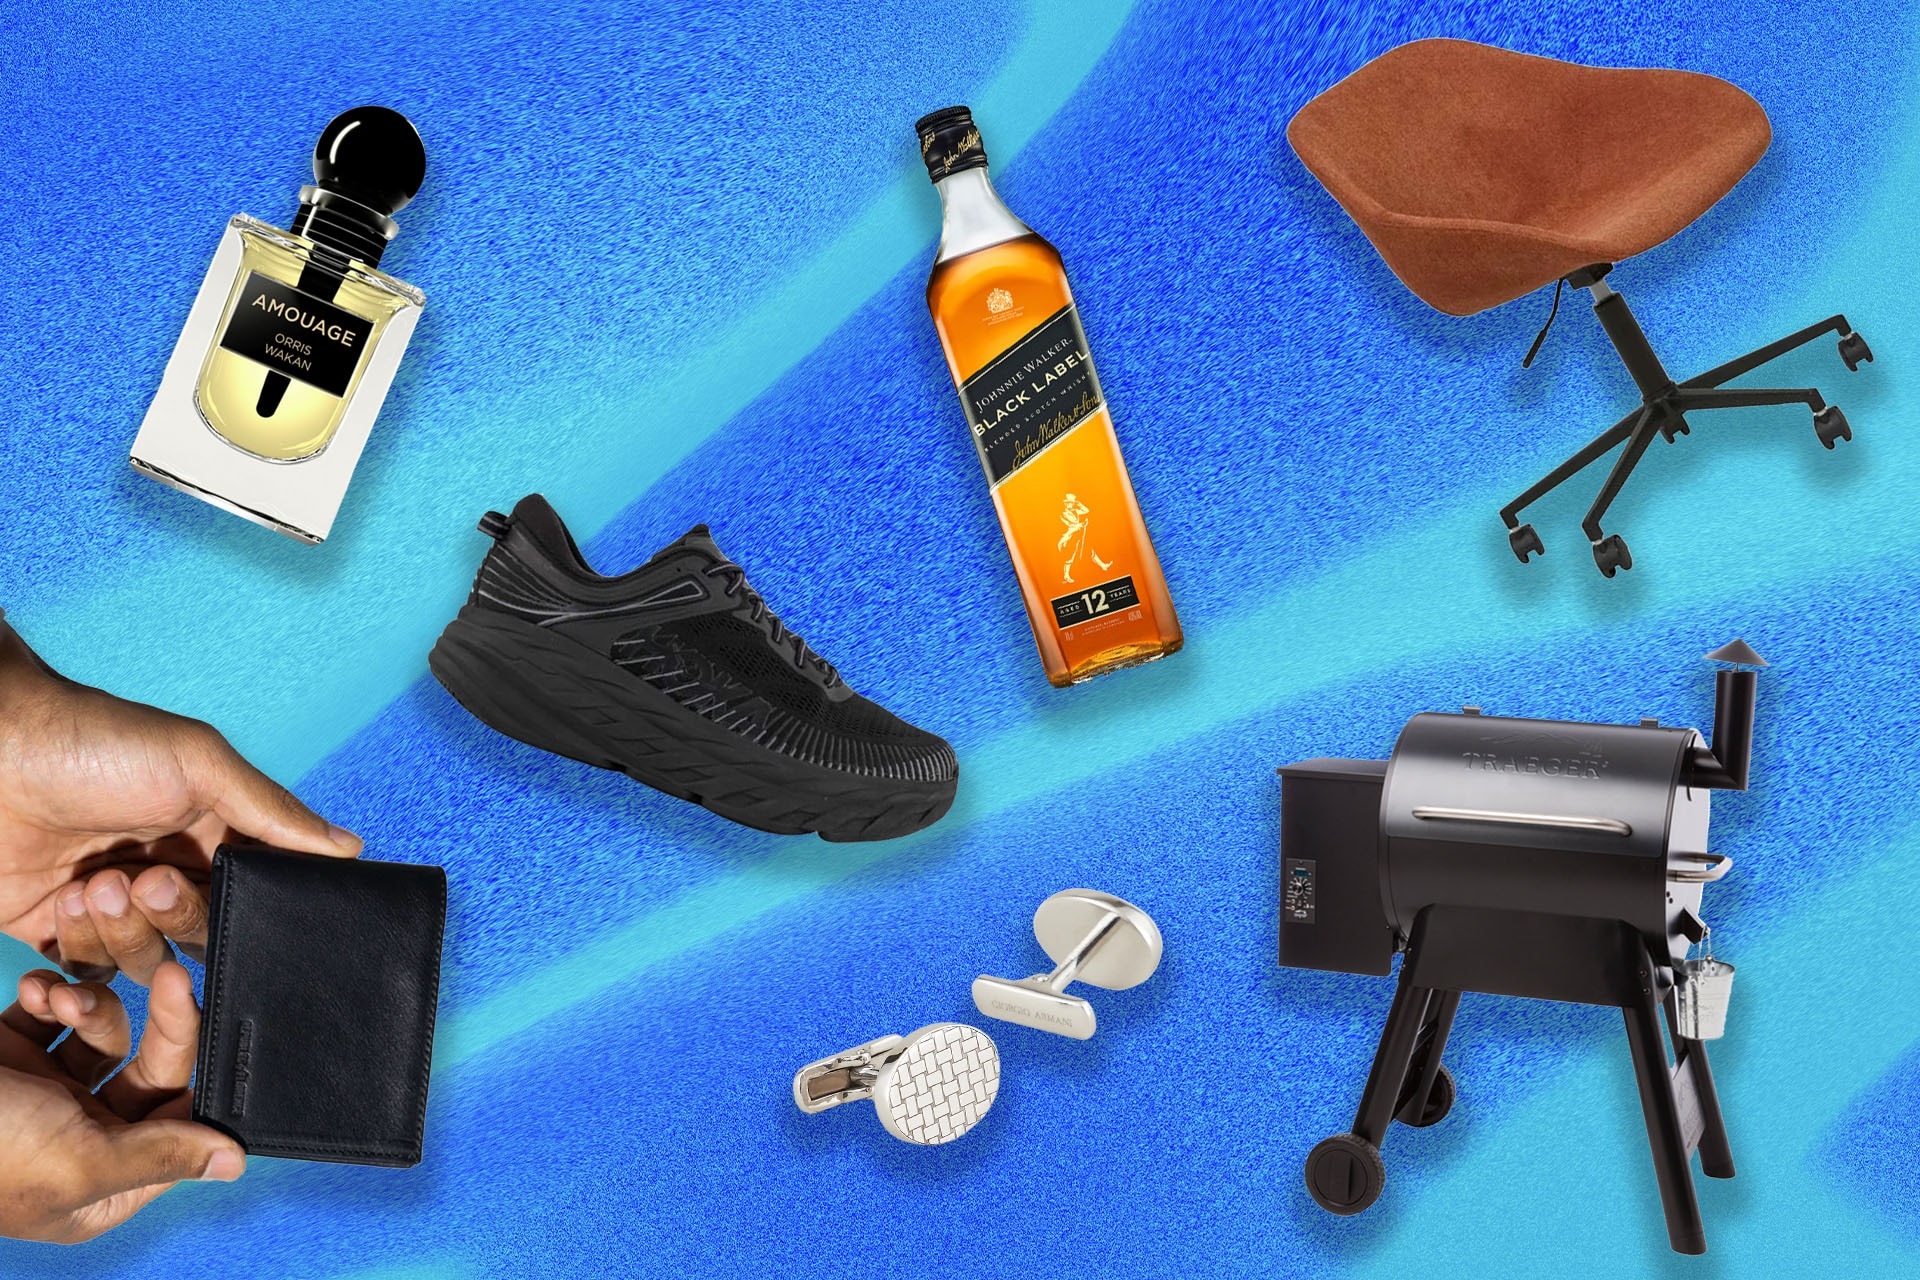 50 CENT Father's Day Gifts Under $50